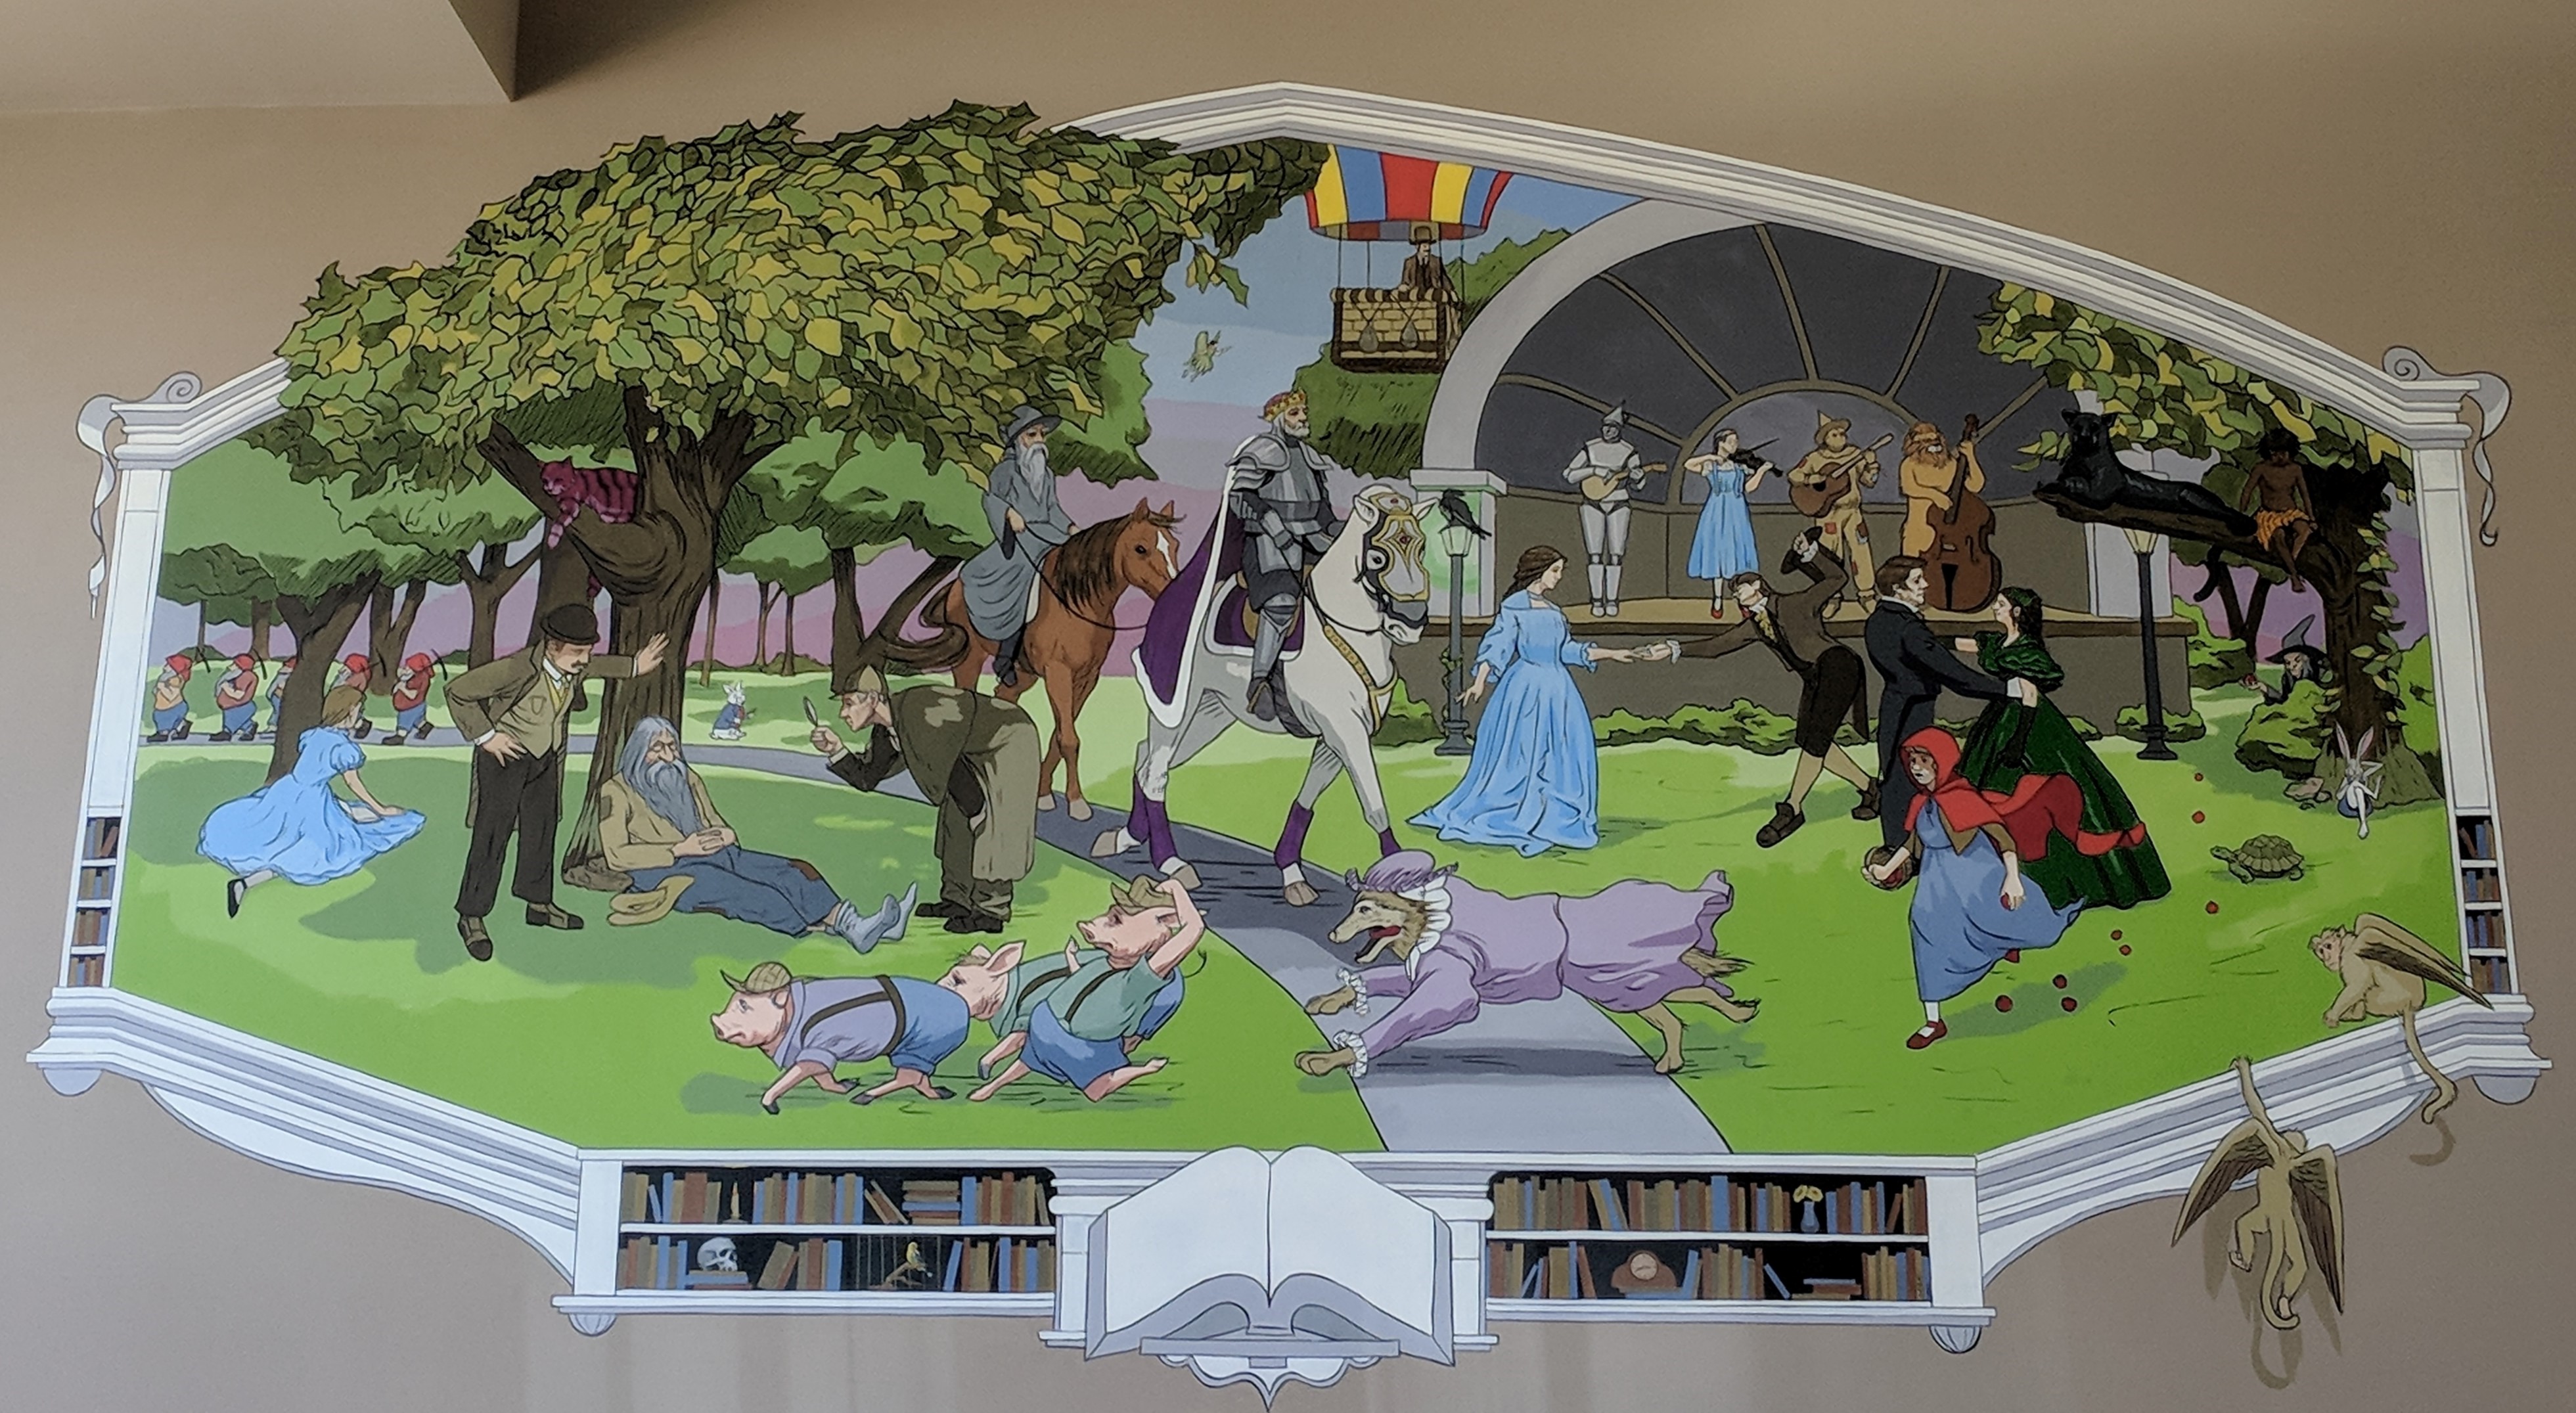 Completed mural depicting characters from famous books